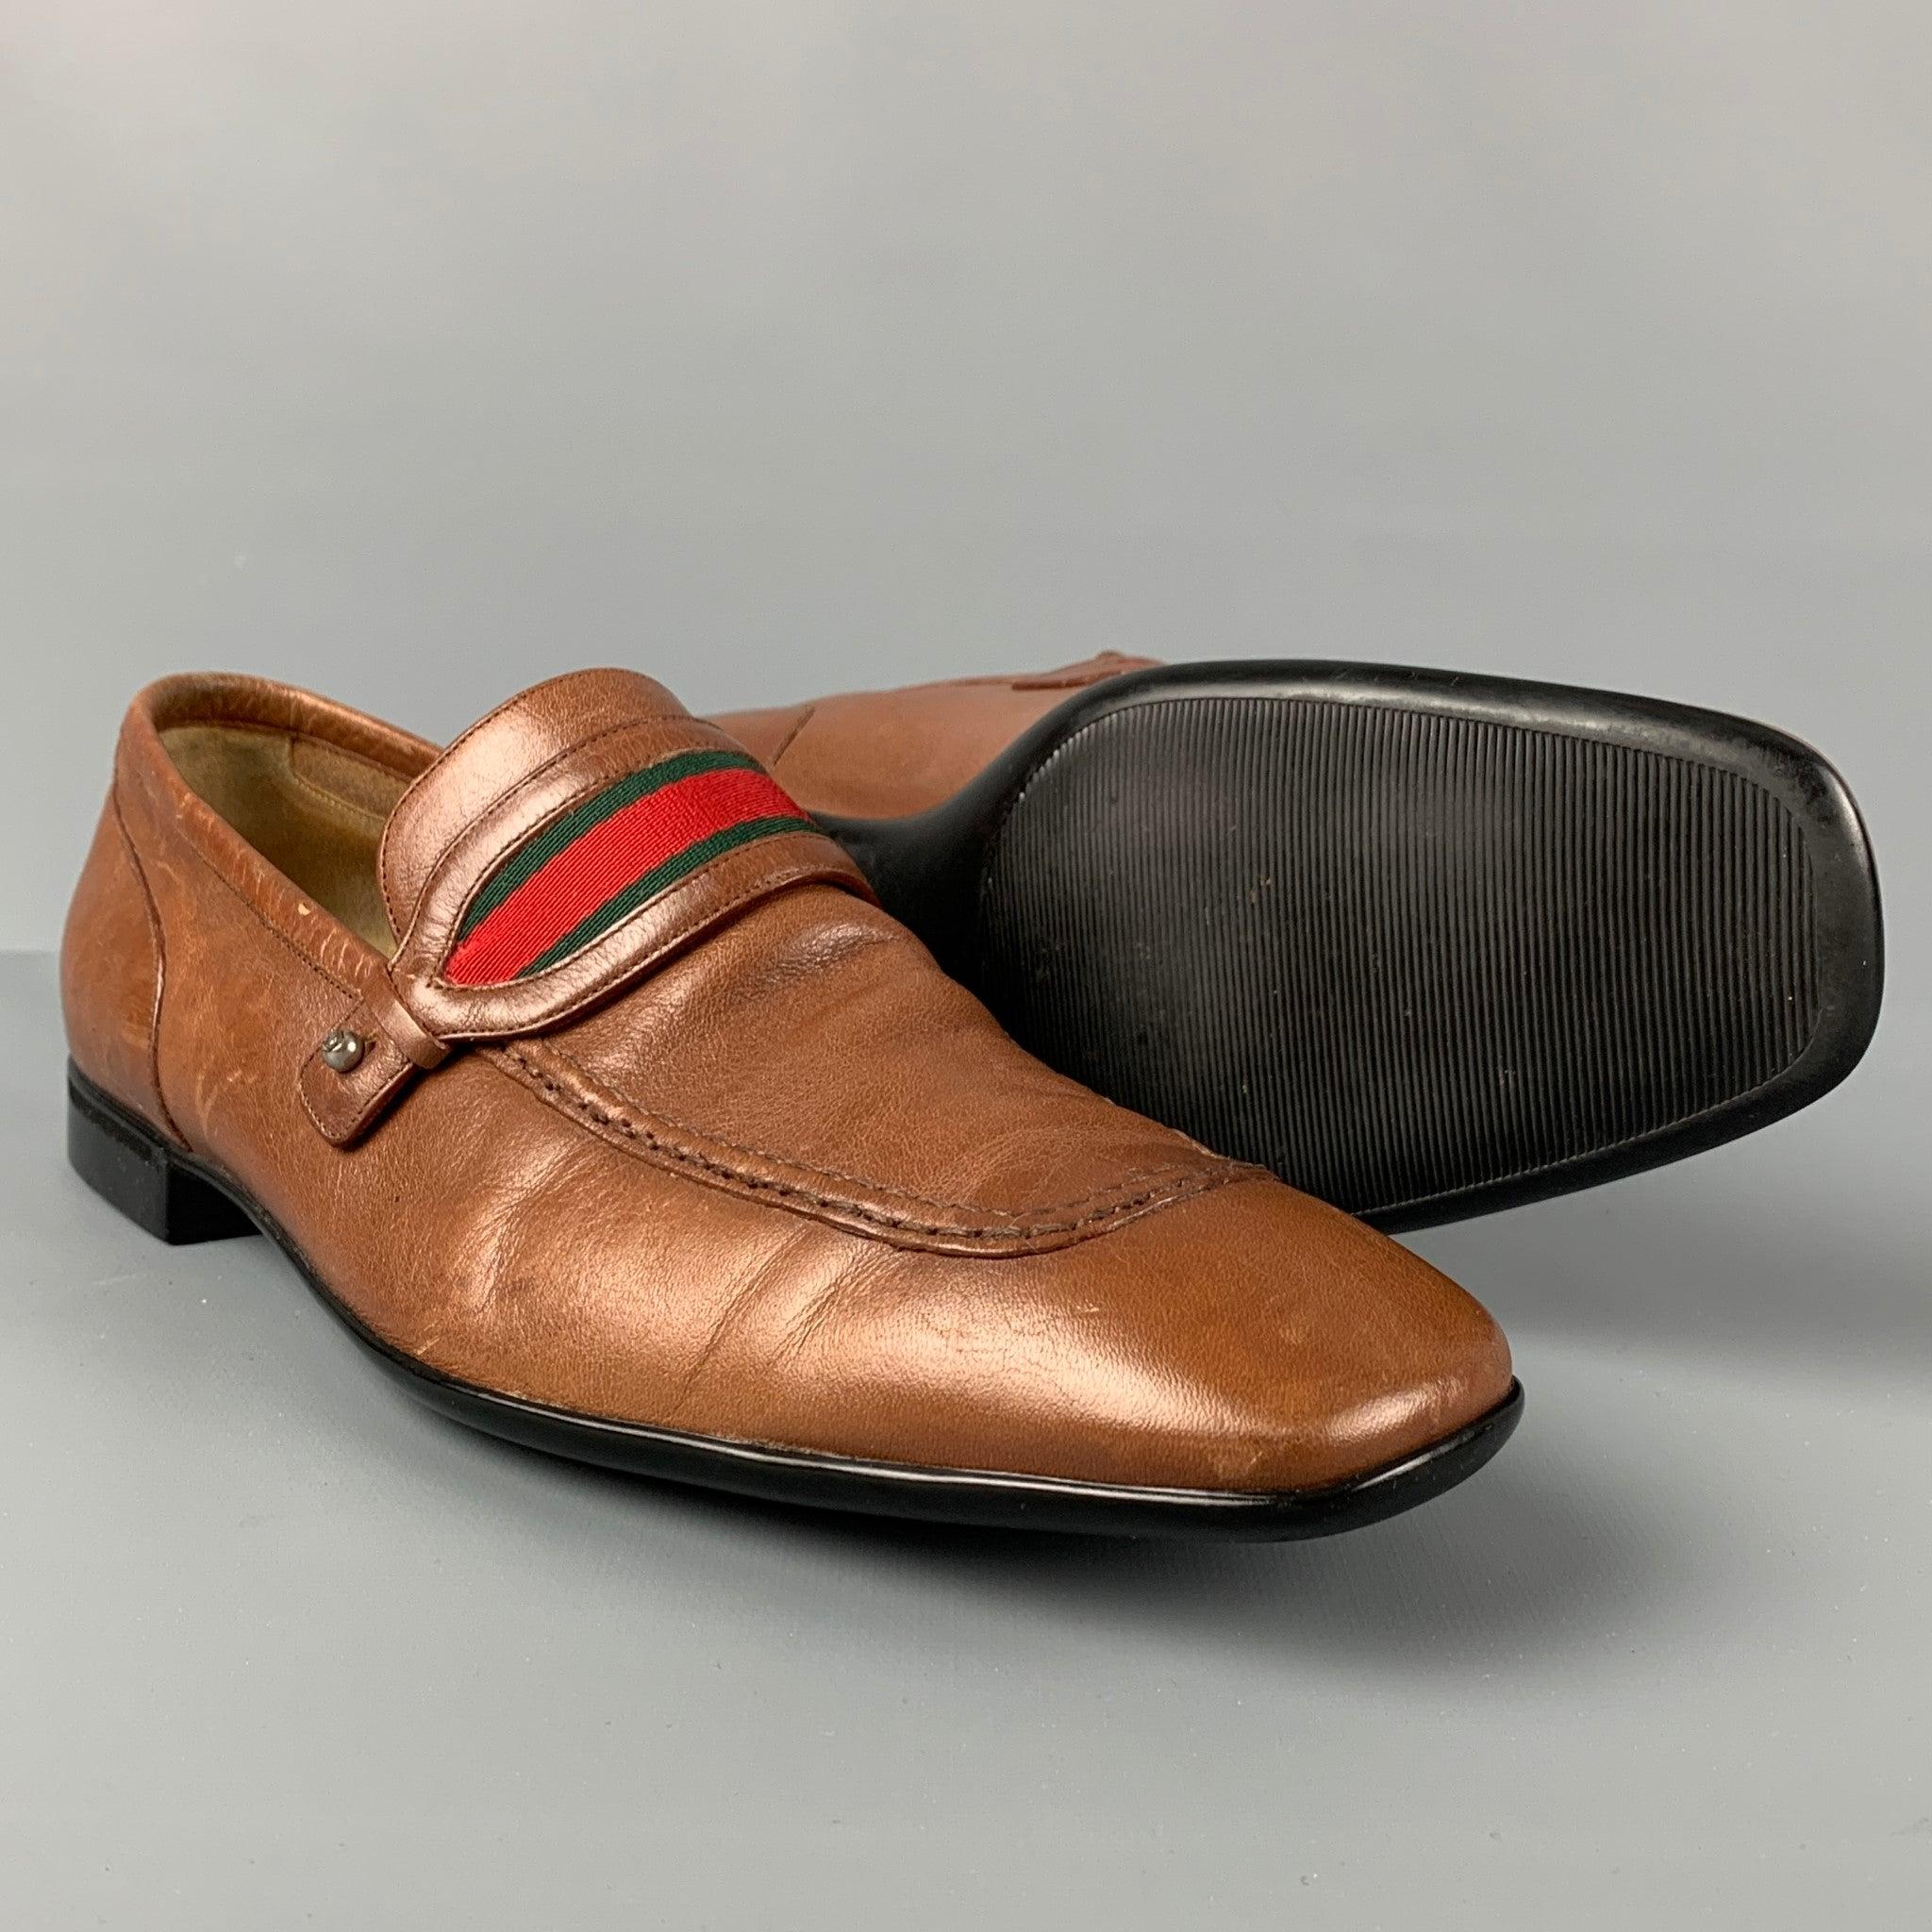 Vintage GUCCI Size 7.5 Tan Green Red Slip On Loafers In Good Condition For Sale In San Francisco, CA